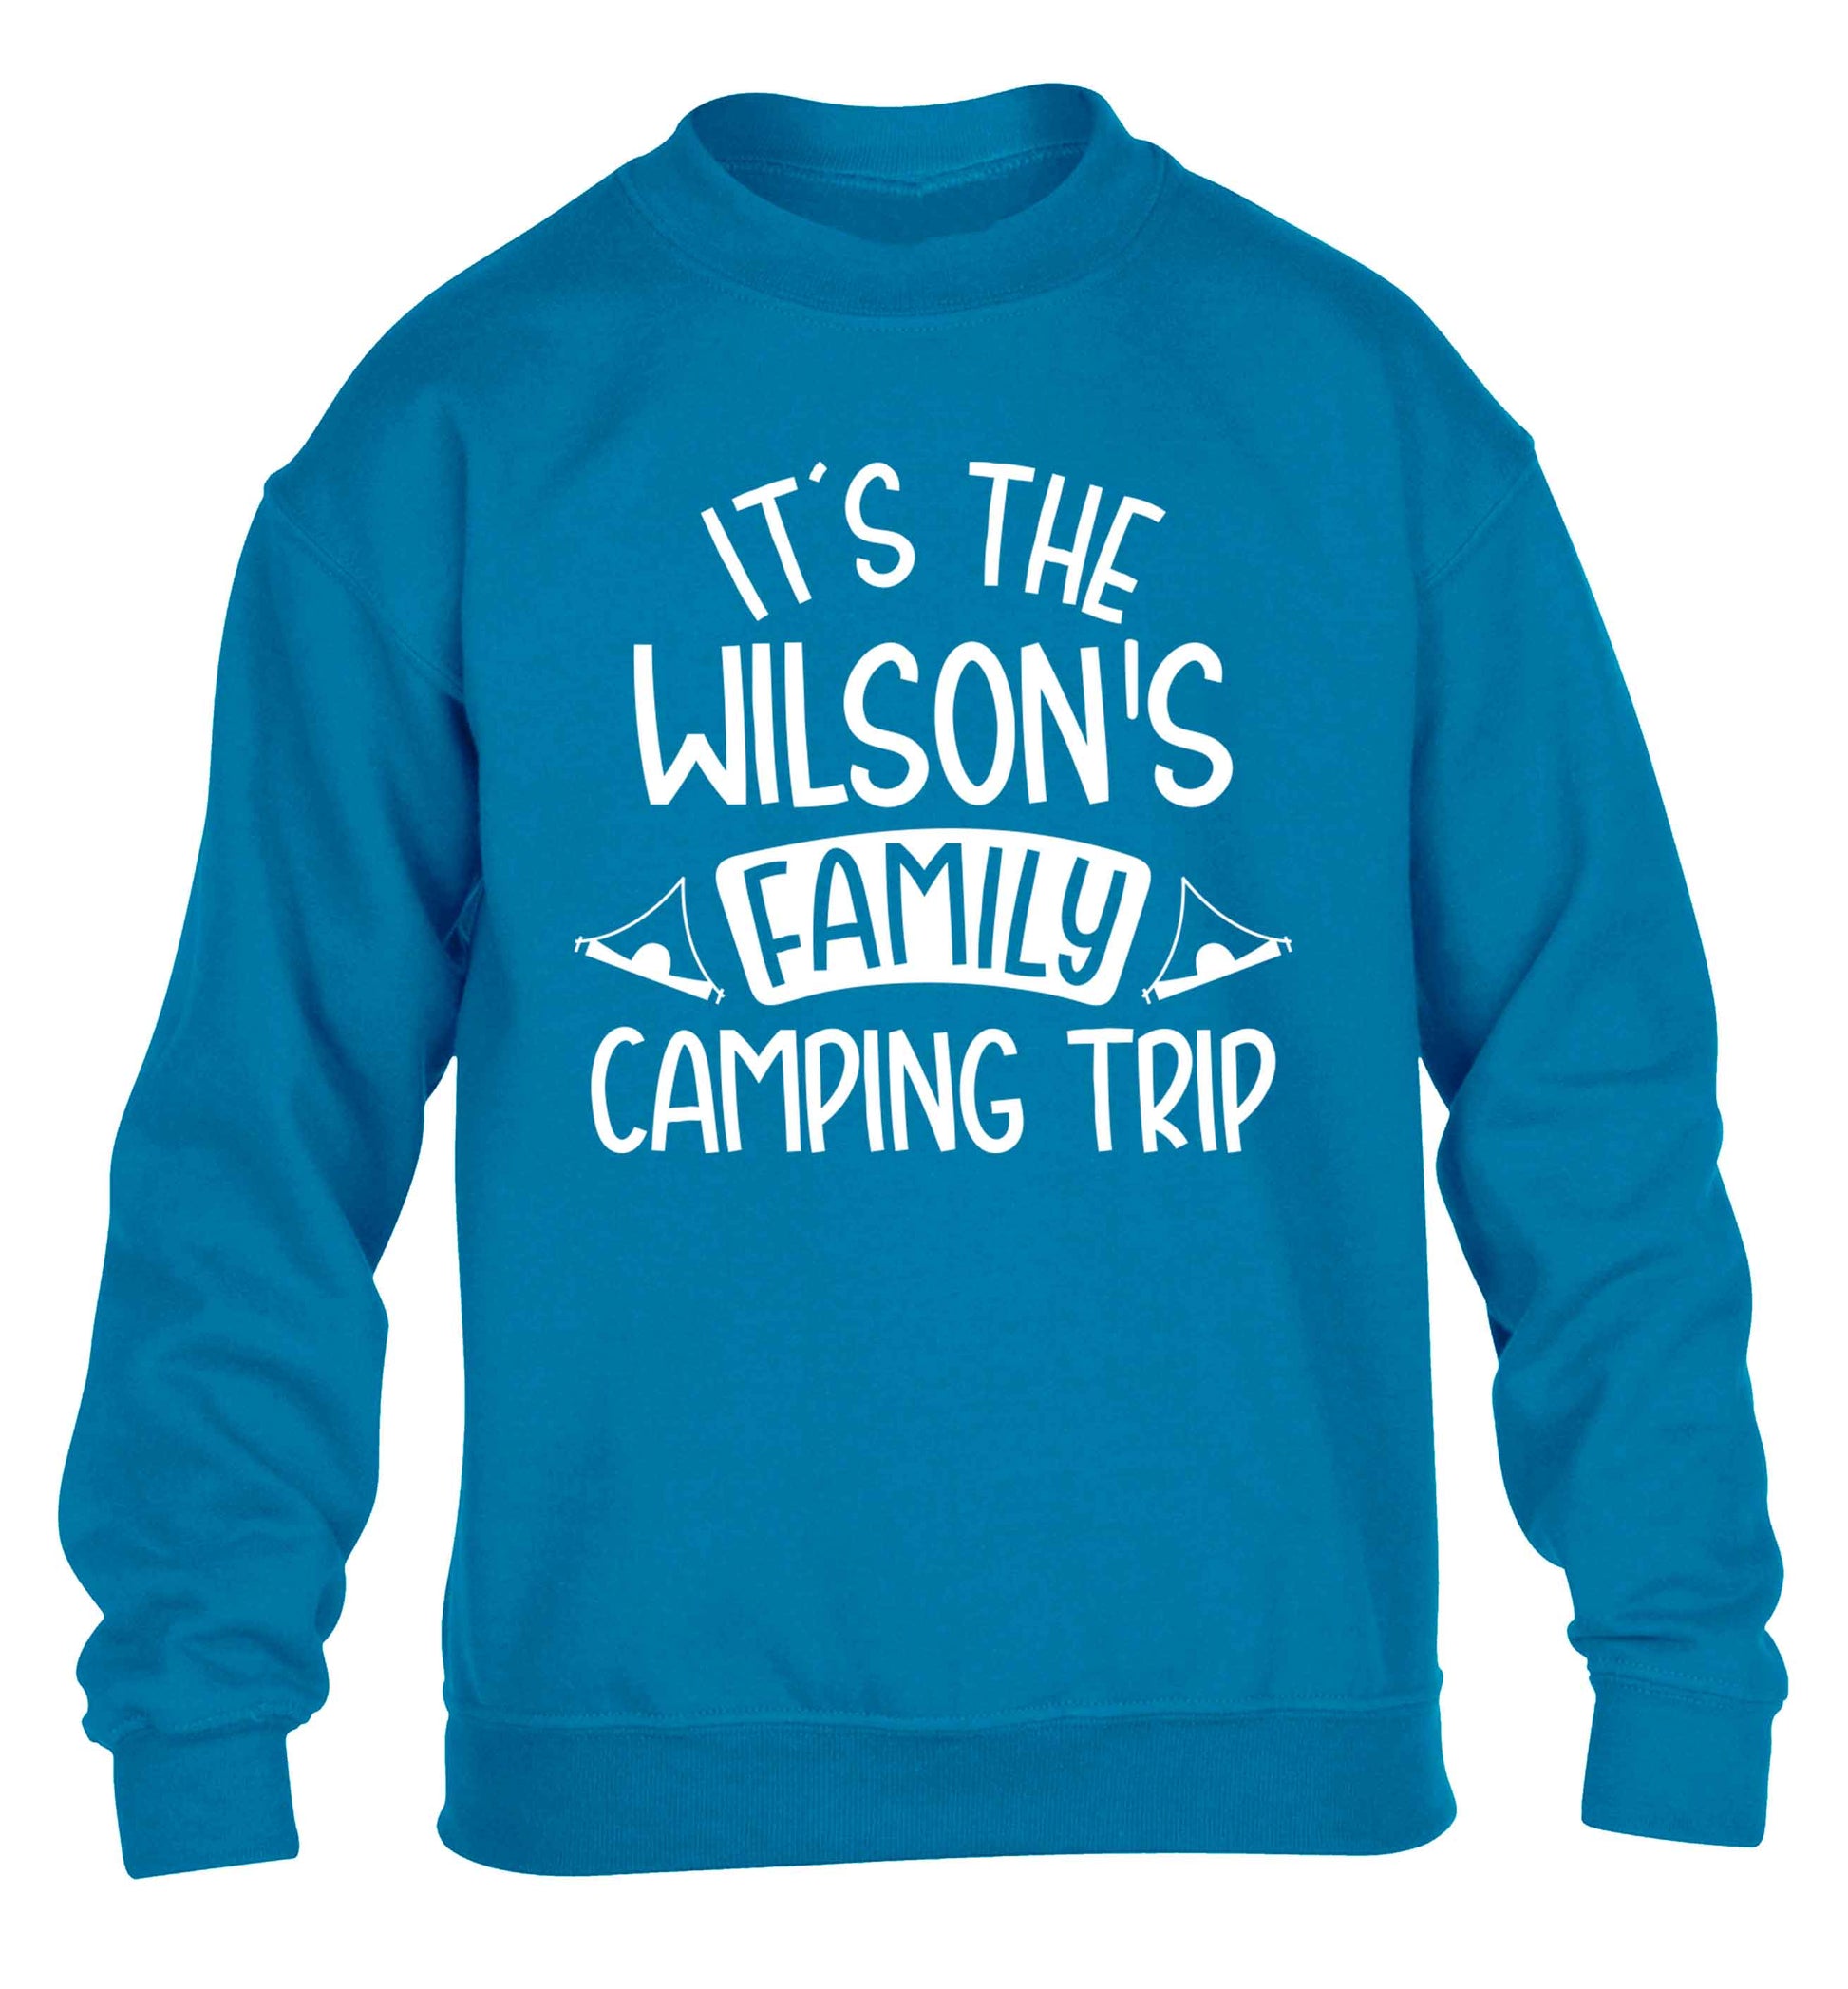 It's the Wilson's family camping trip personalised children's blue sweater 12-13 Years